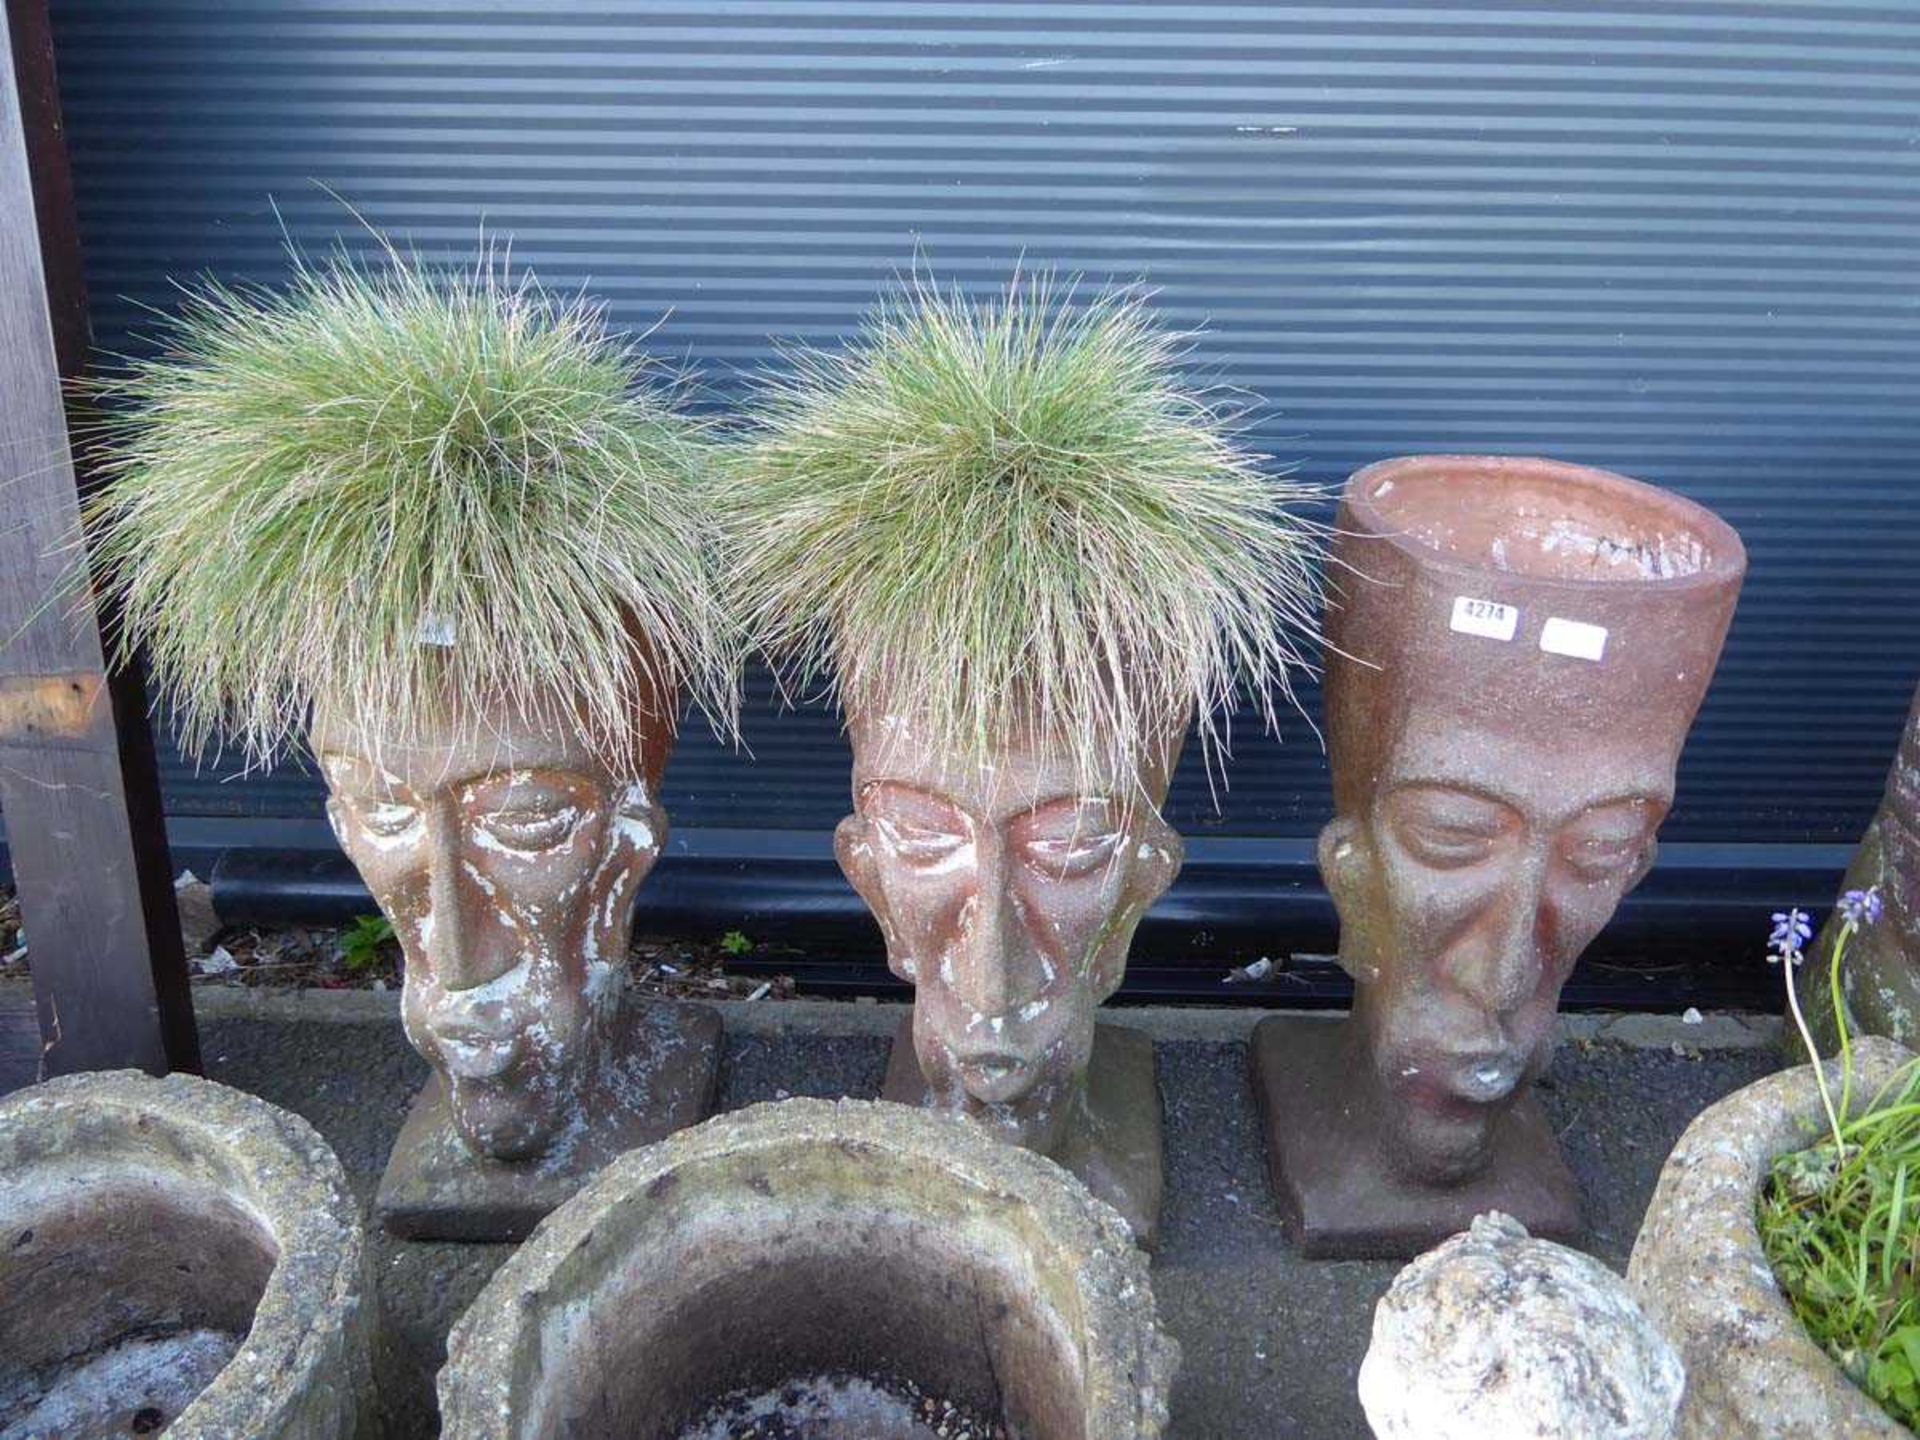 3 terracotta planters in the form of heads - 2 with grass